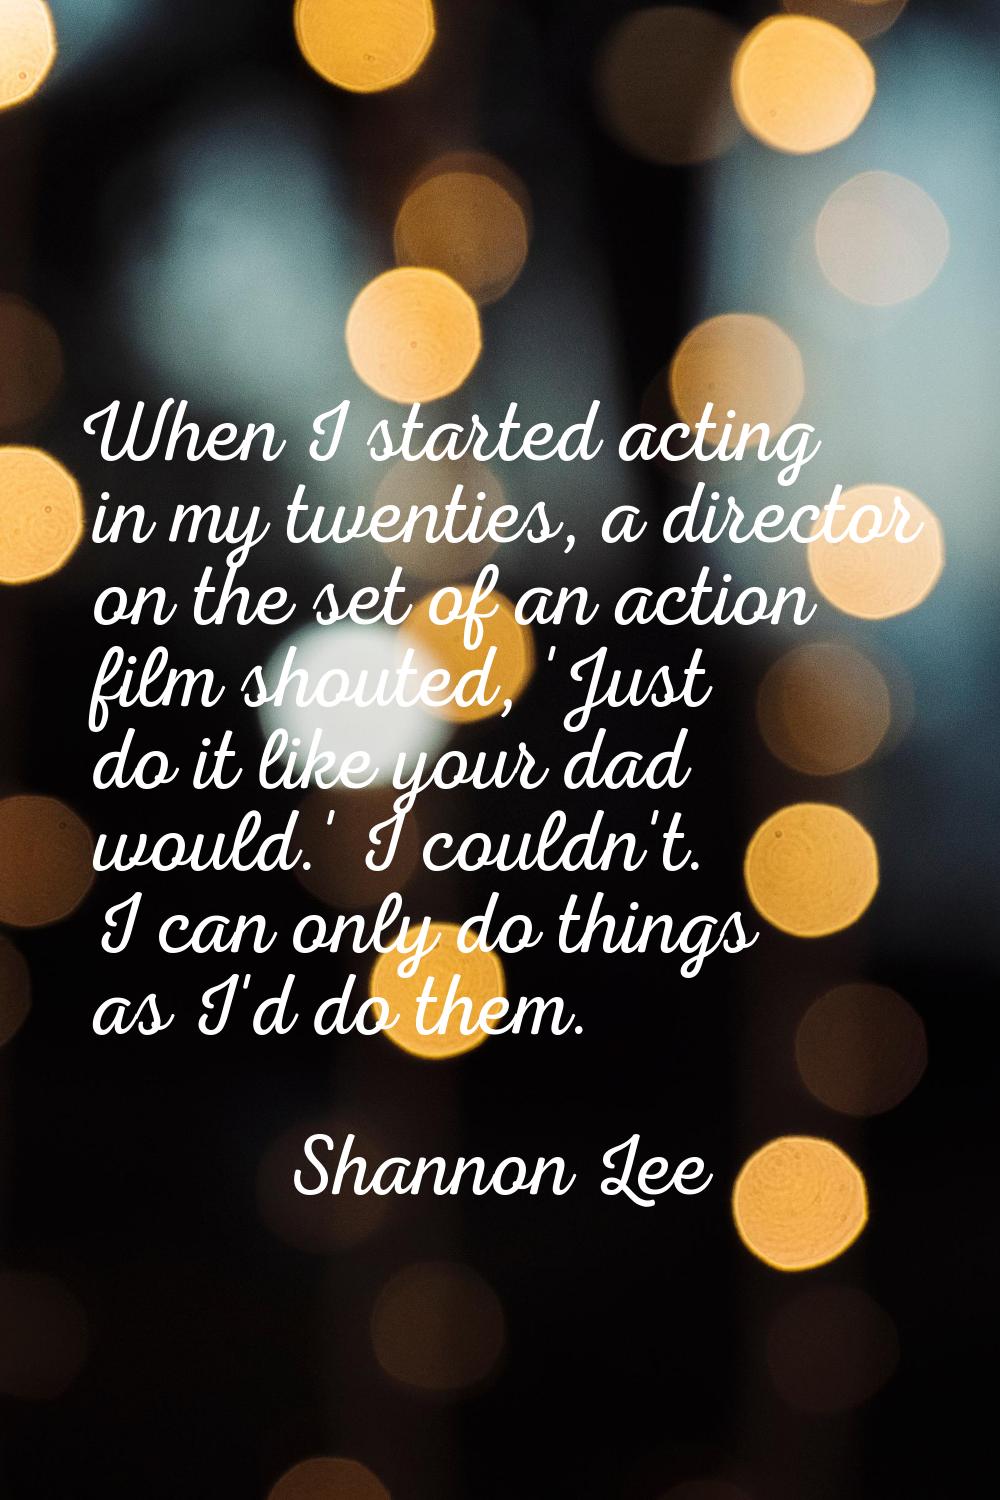 When I started acting in my twenties, a director on the set of an action film shouted, 'Just do it 